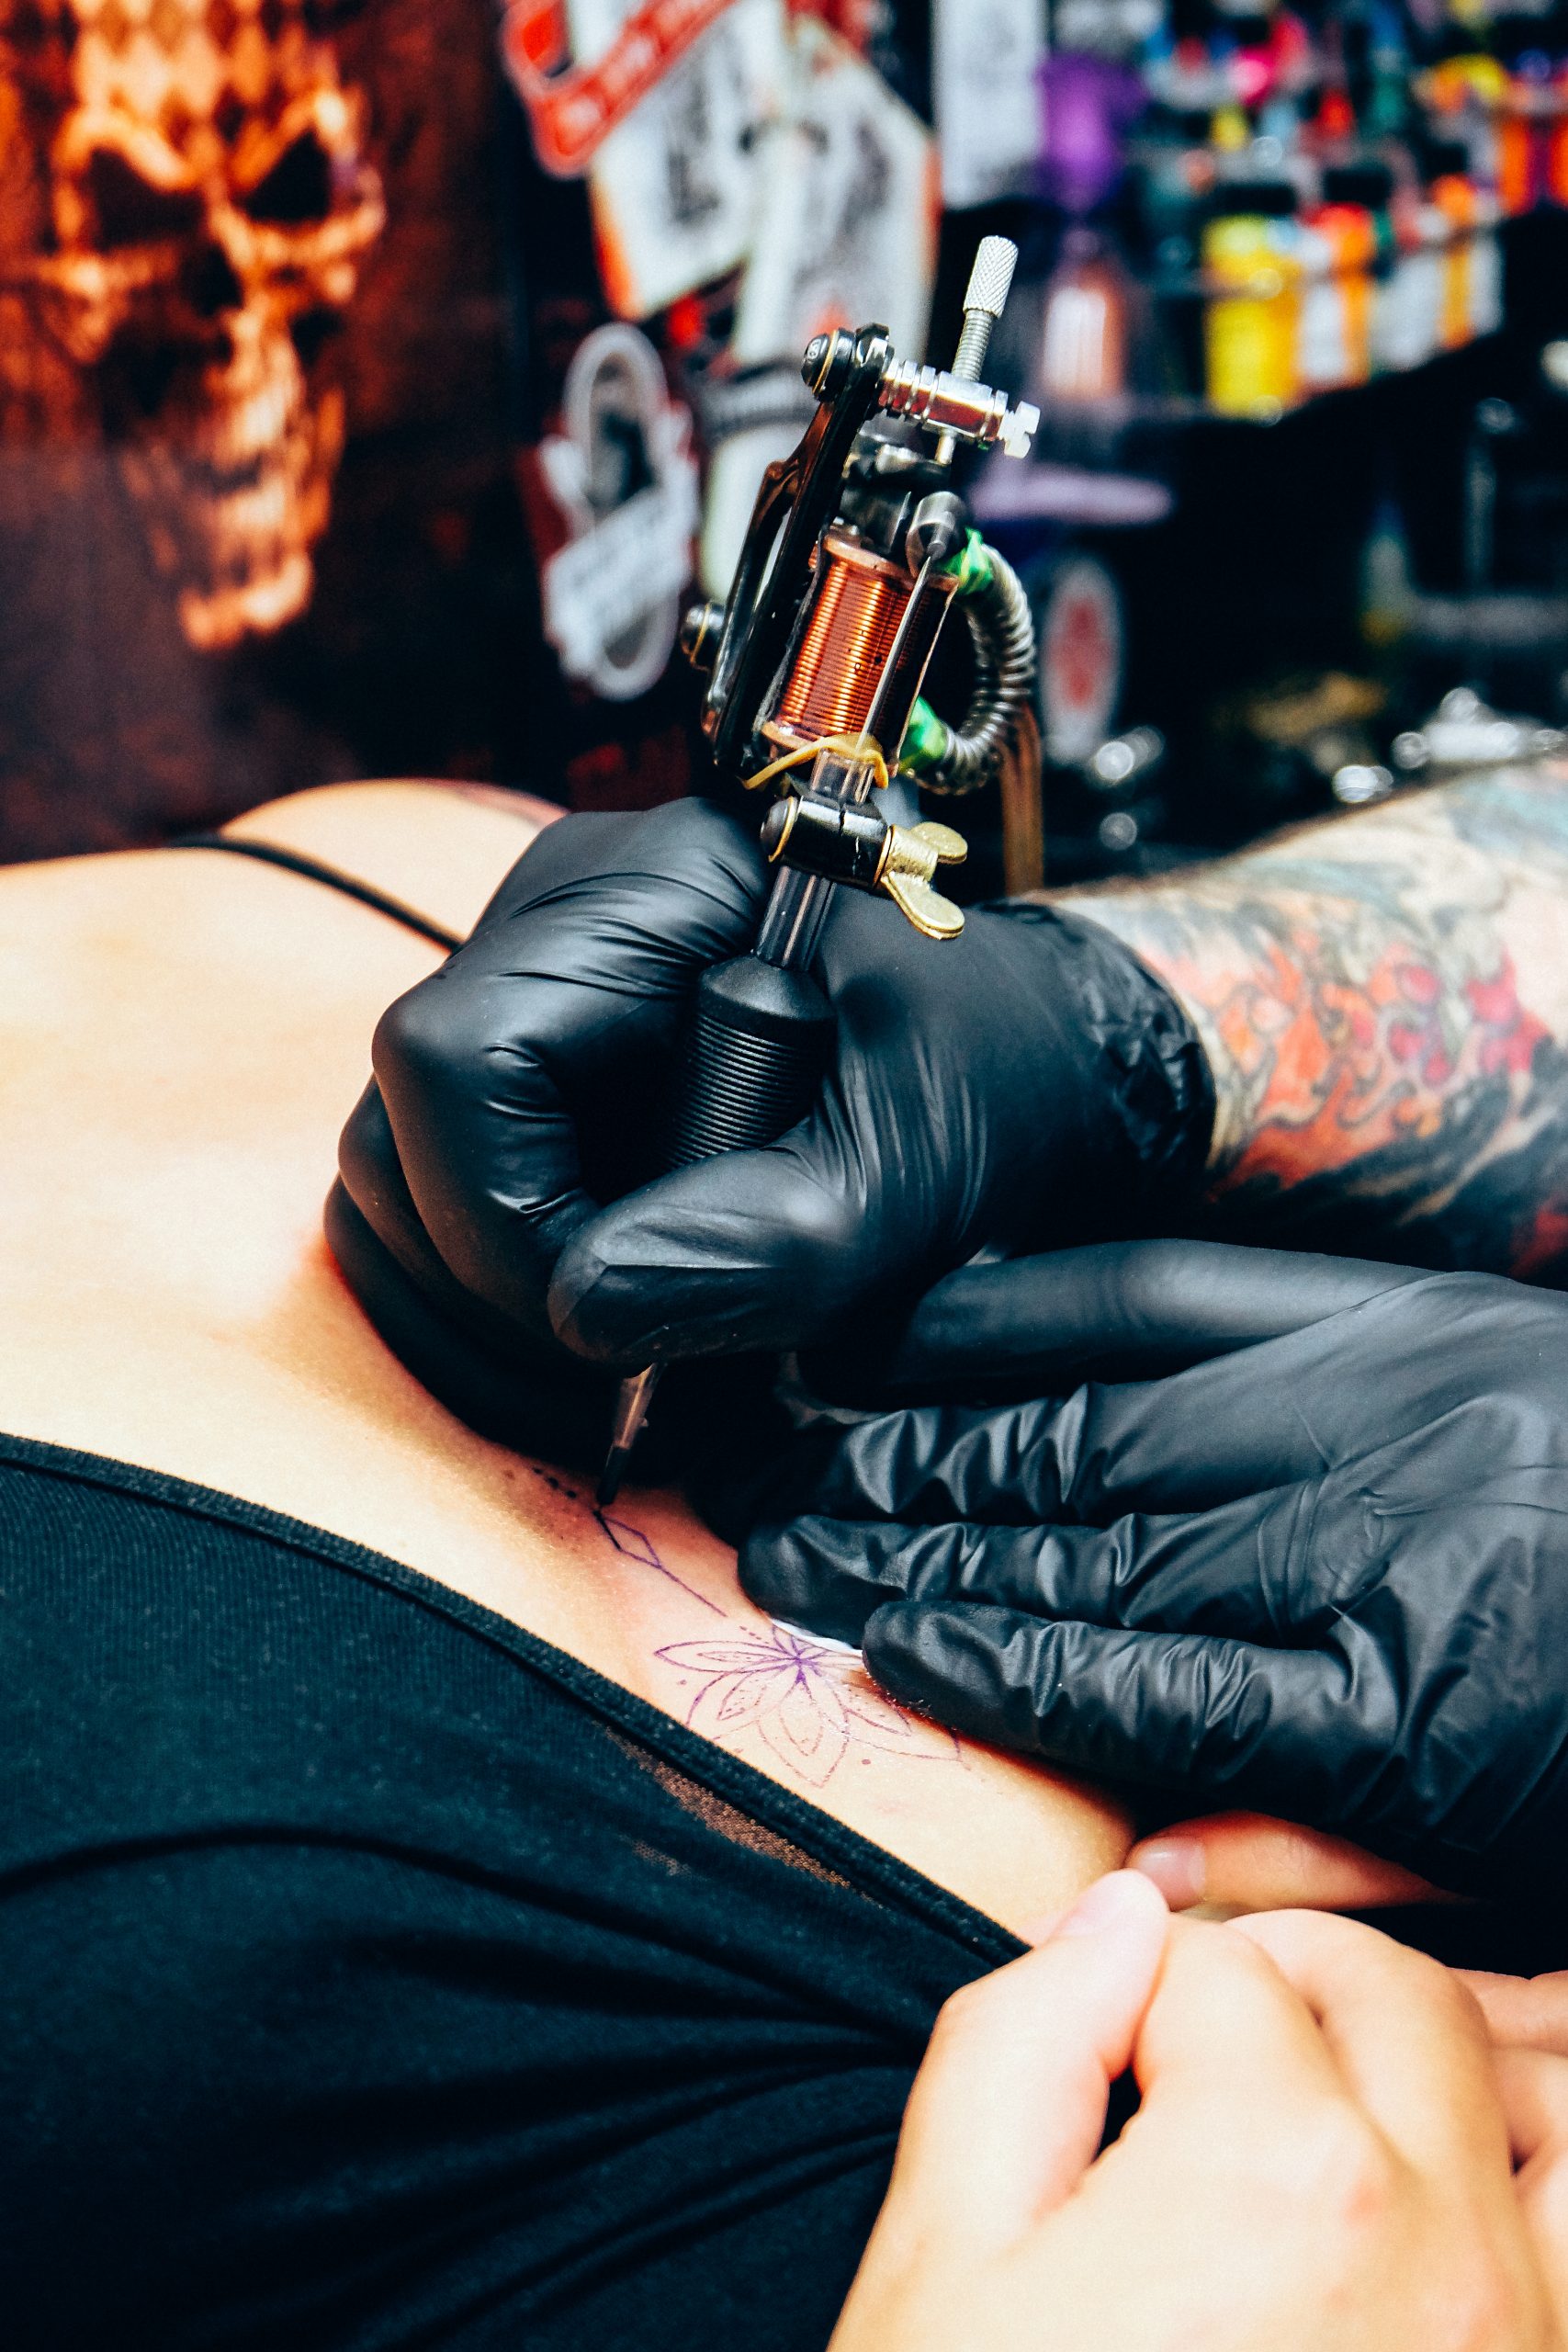 tattooist-tattooing-a-women-s-chest-with-gloves-an-2022-11-16-19-07-02-utc-scaled.jpg